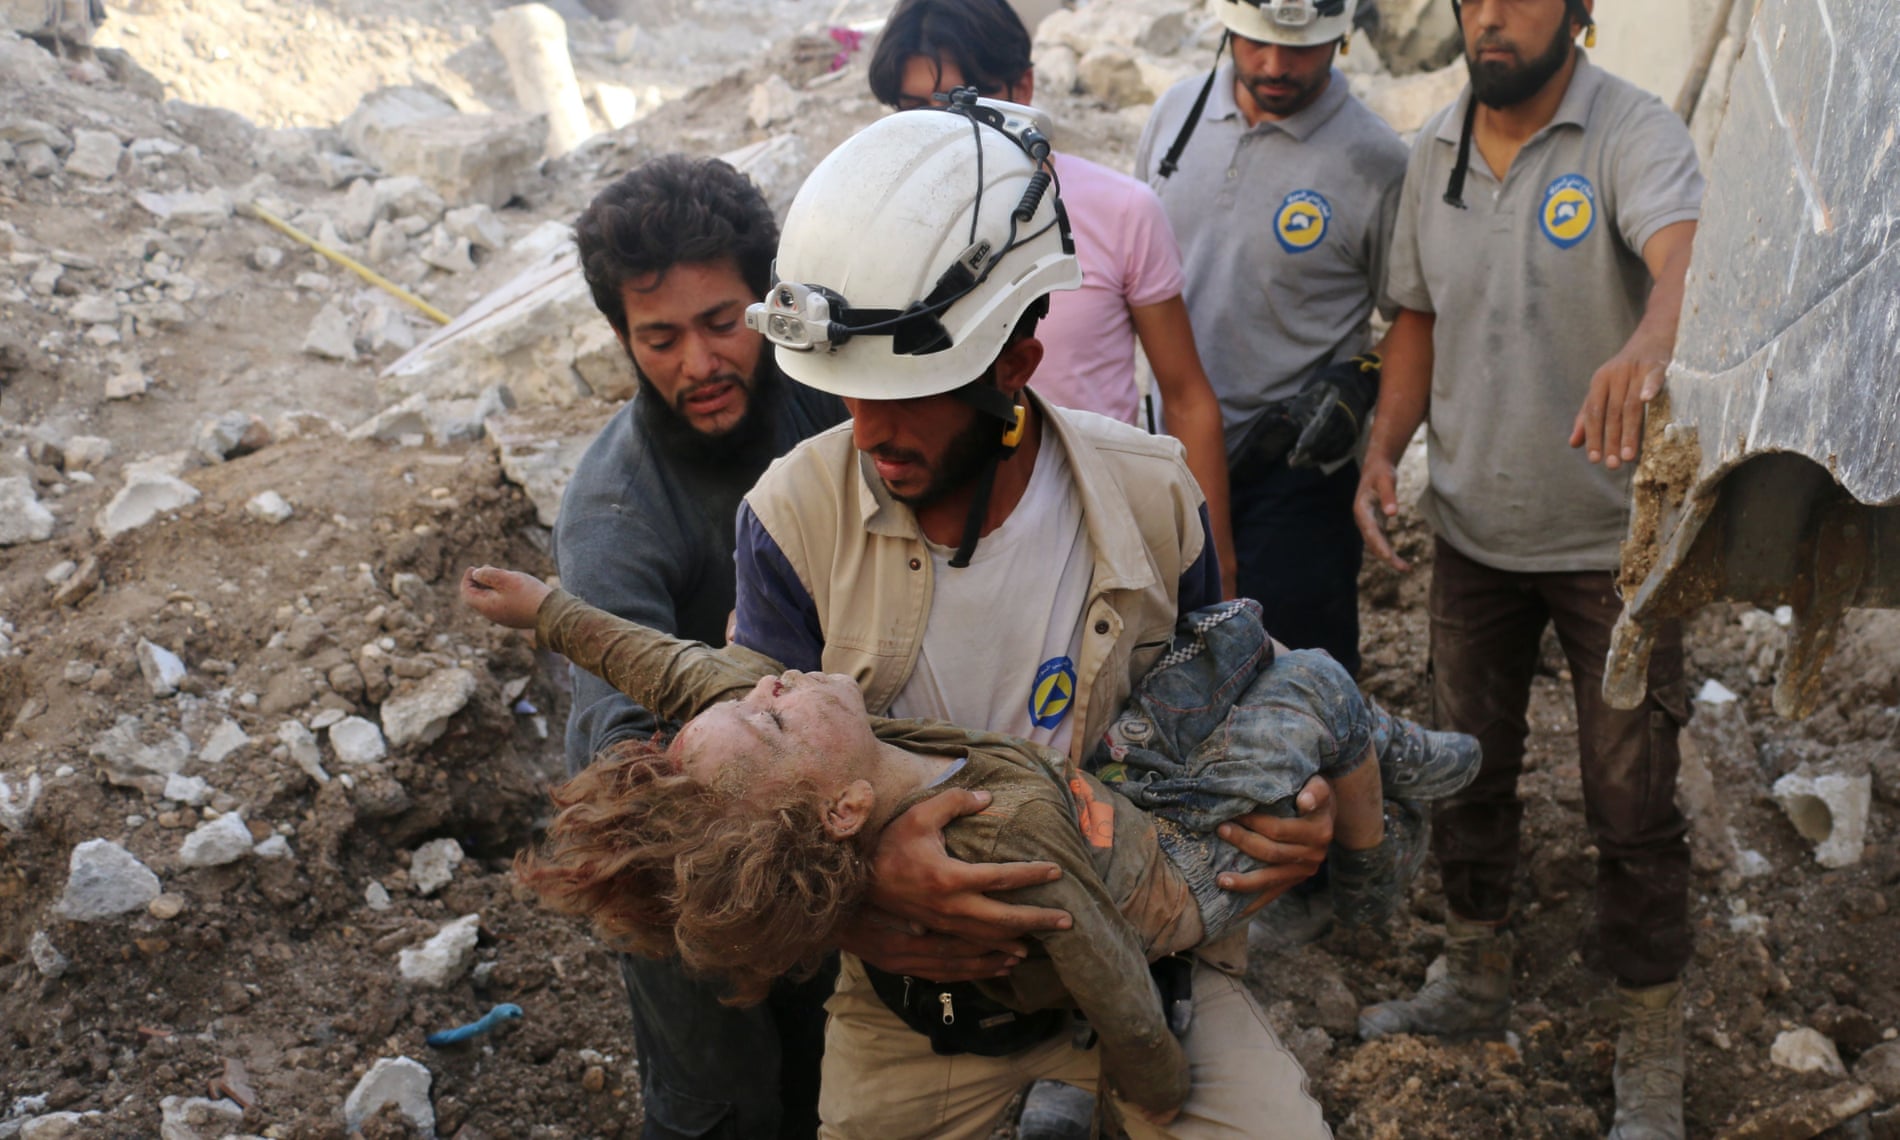 A member of the White Helmets, also known as the Syrian civil defence, holds a child pulled from the rubble following an airstrike in Aleppo in 2016.